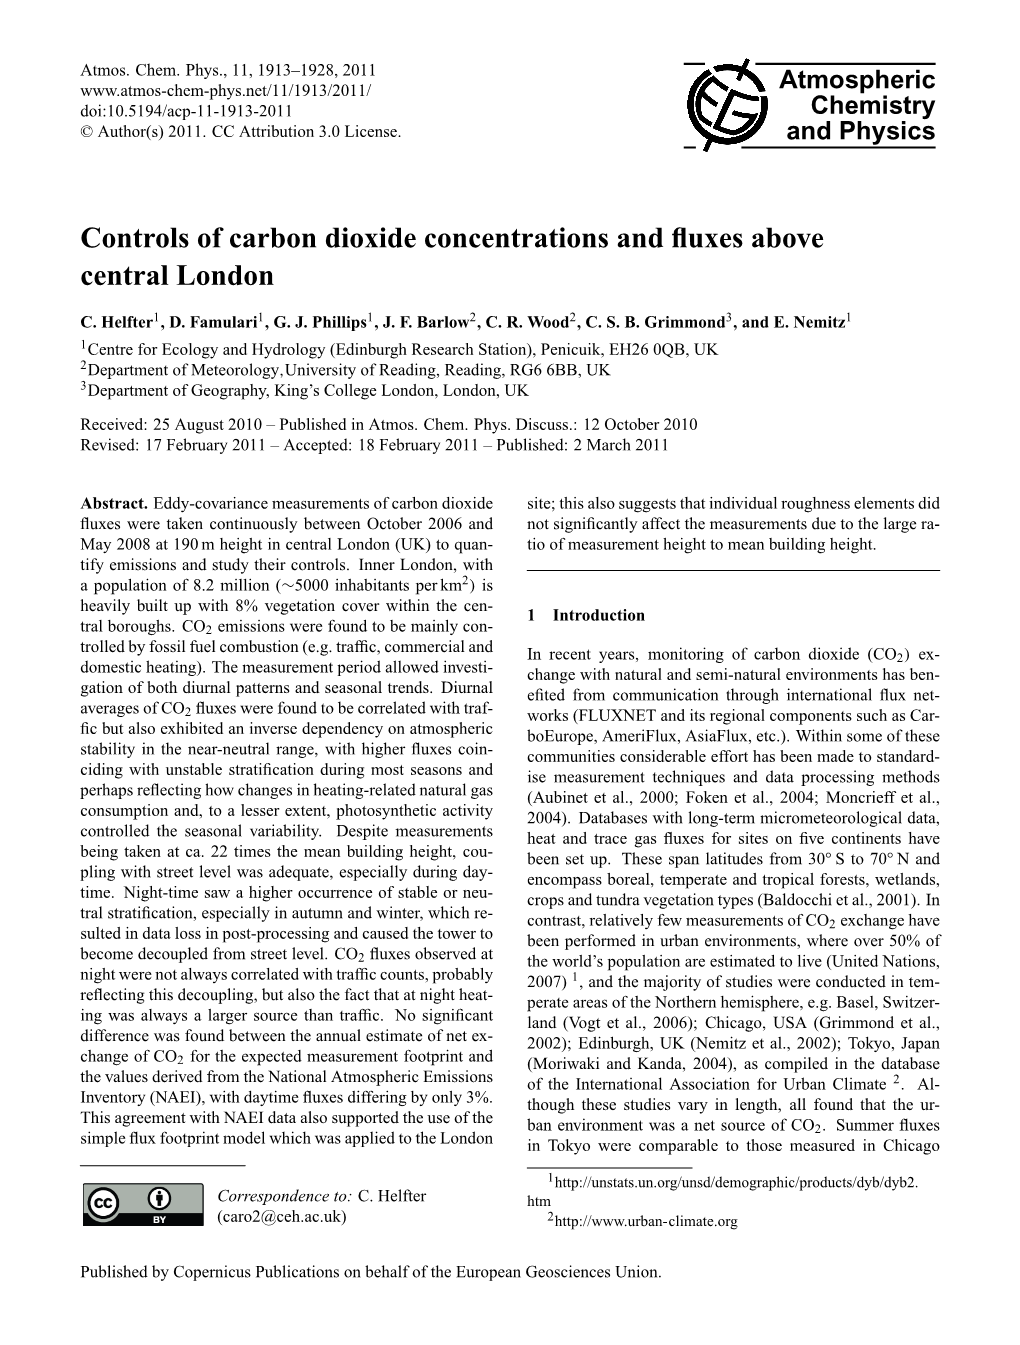 Controls of Carbon Dioxide Concentrations and Fluxes Above